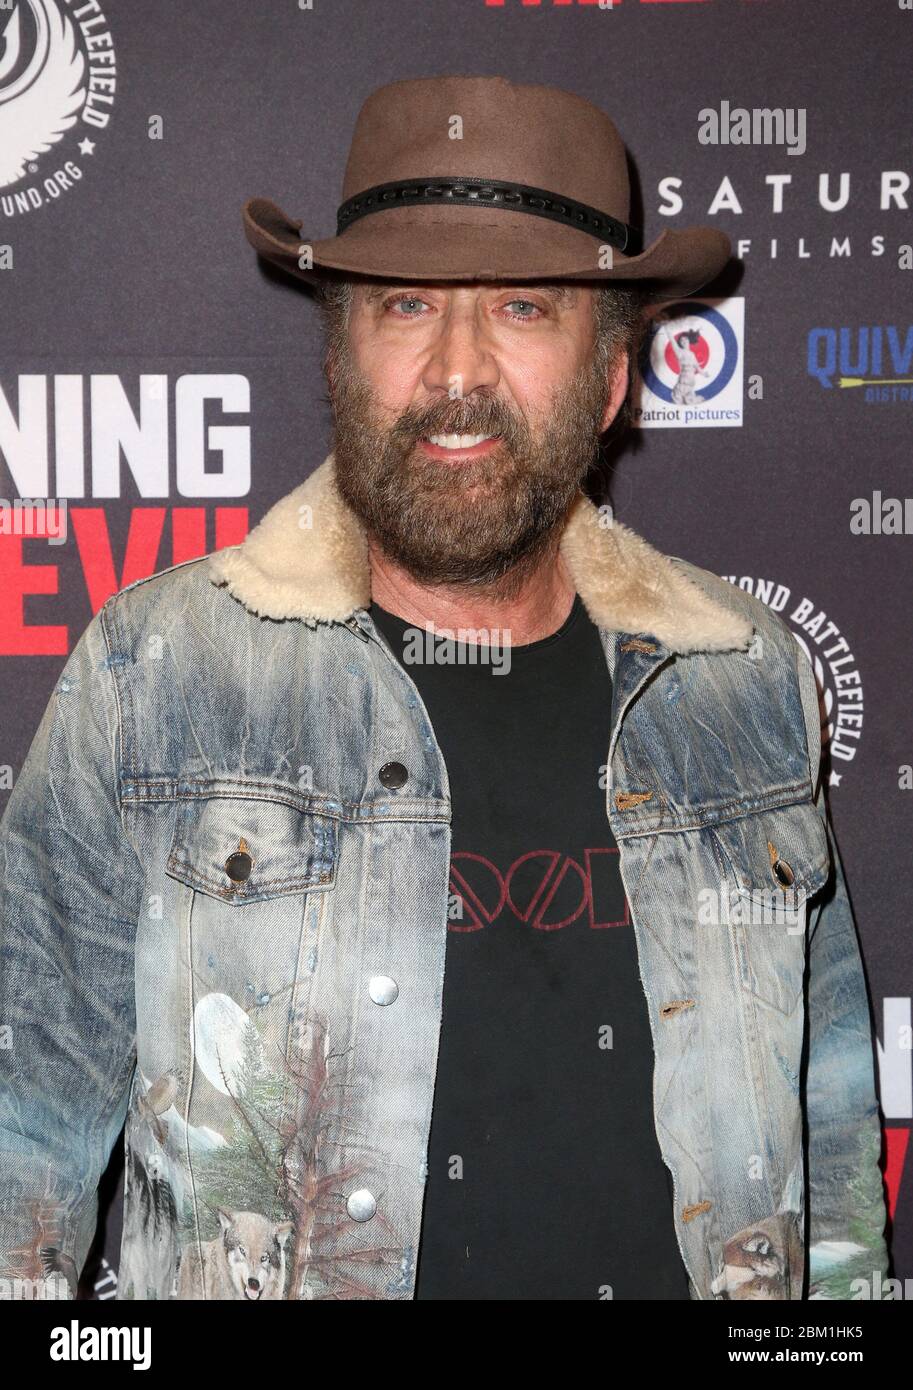 May 06, 2020: FILE: NICOLAS CAGE has been tapped to play Joe Exotic, the subject of the popular Netflix docuseries ''Tiger King,'' in a limited series that is currently in development. PICTURED: September 16, 2019, Beverly Hills, CA, USA: Nicolas Cage at the premiere of Quiver Distribution's ''Running With The Devil'' held at the Writers Guild Theater.  (Credit Image: © F Sadou/AdMedia via ZUMA Wire) Stock Photo